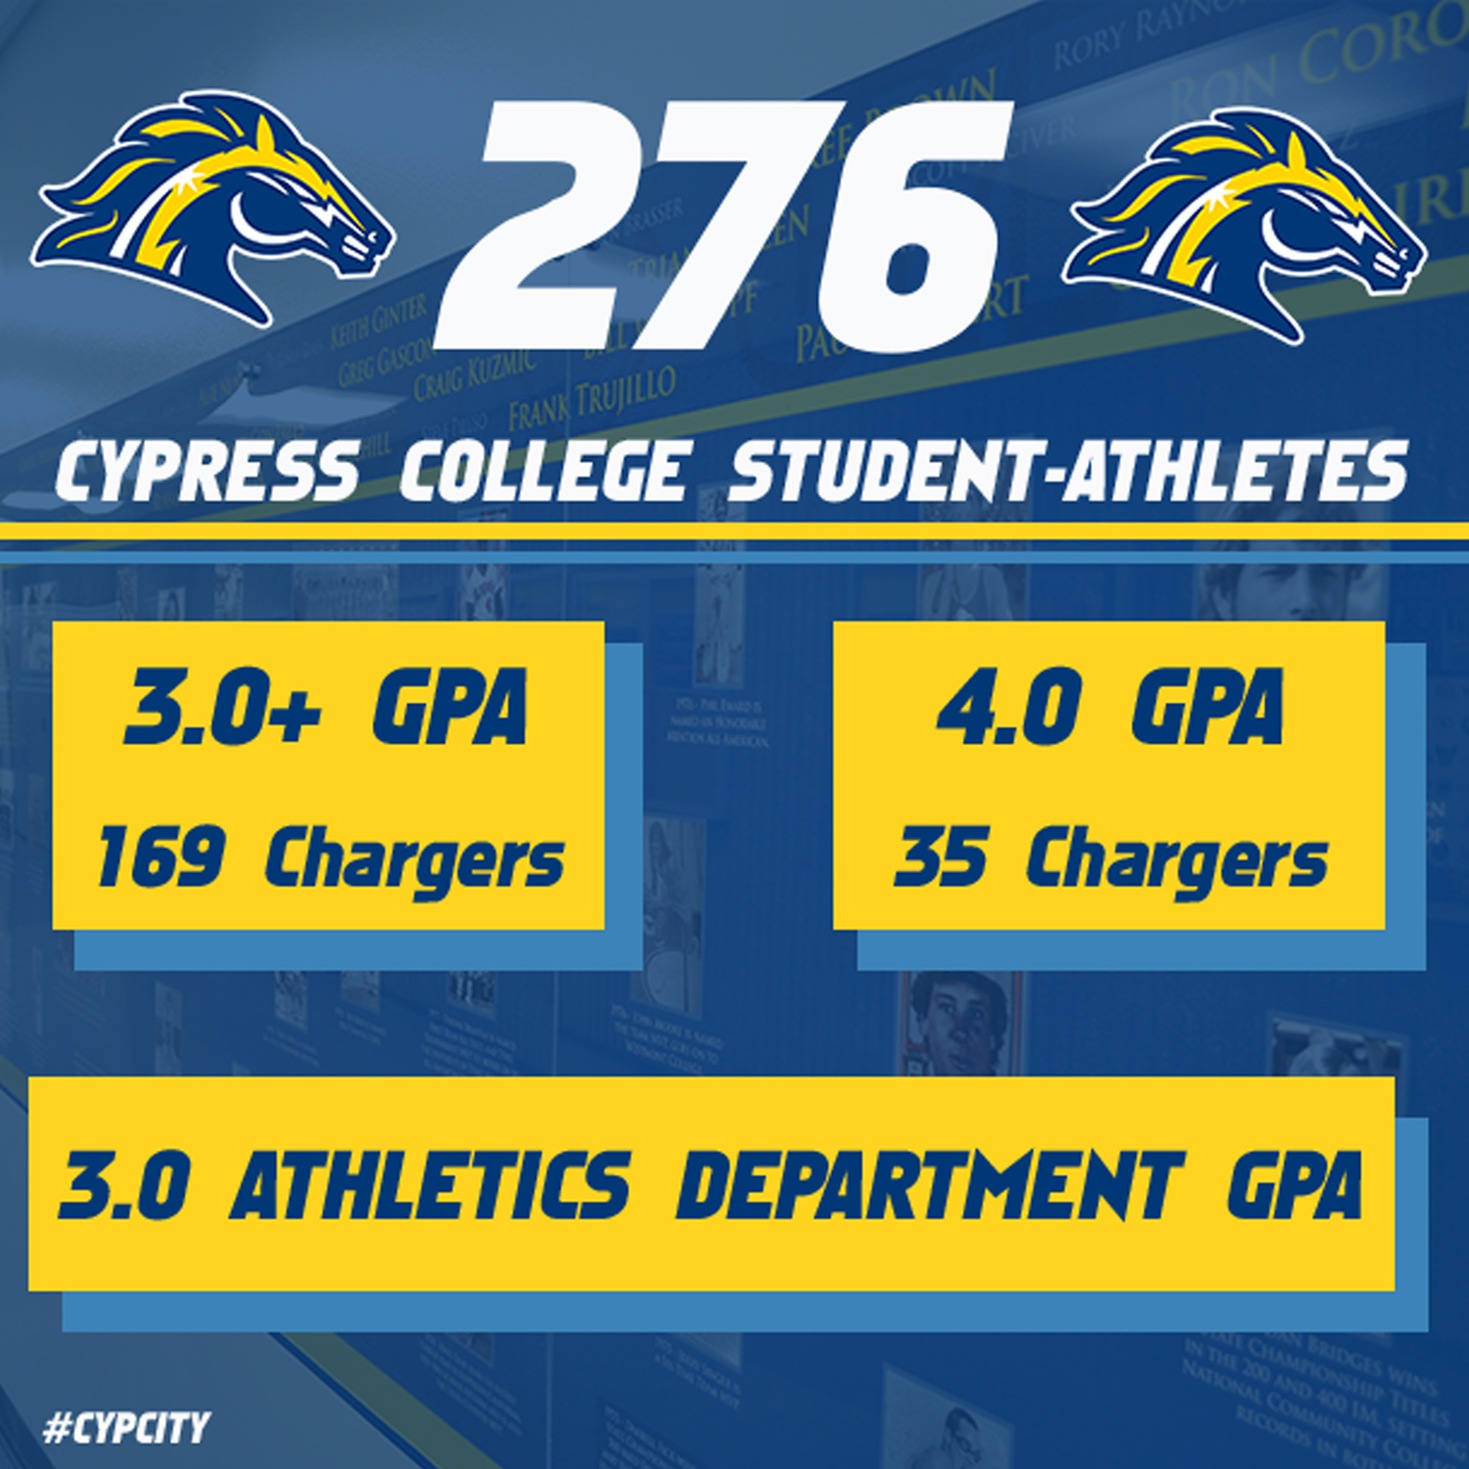 Cypress College Student Athletes Set New Standard for Academic Performance